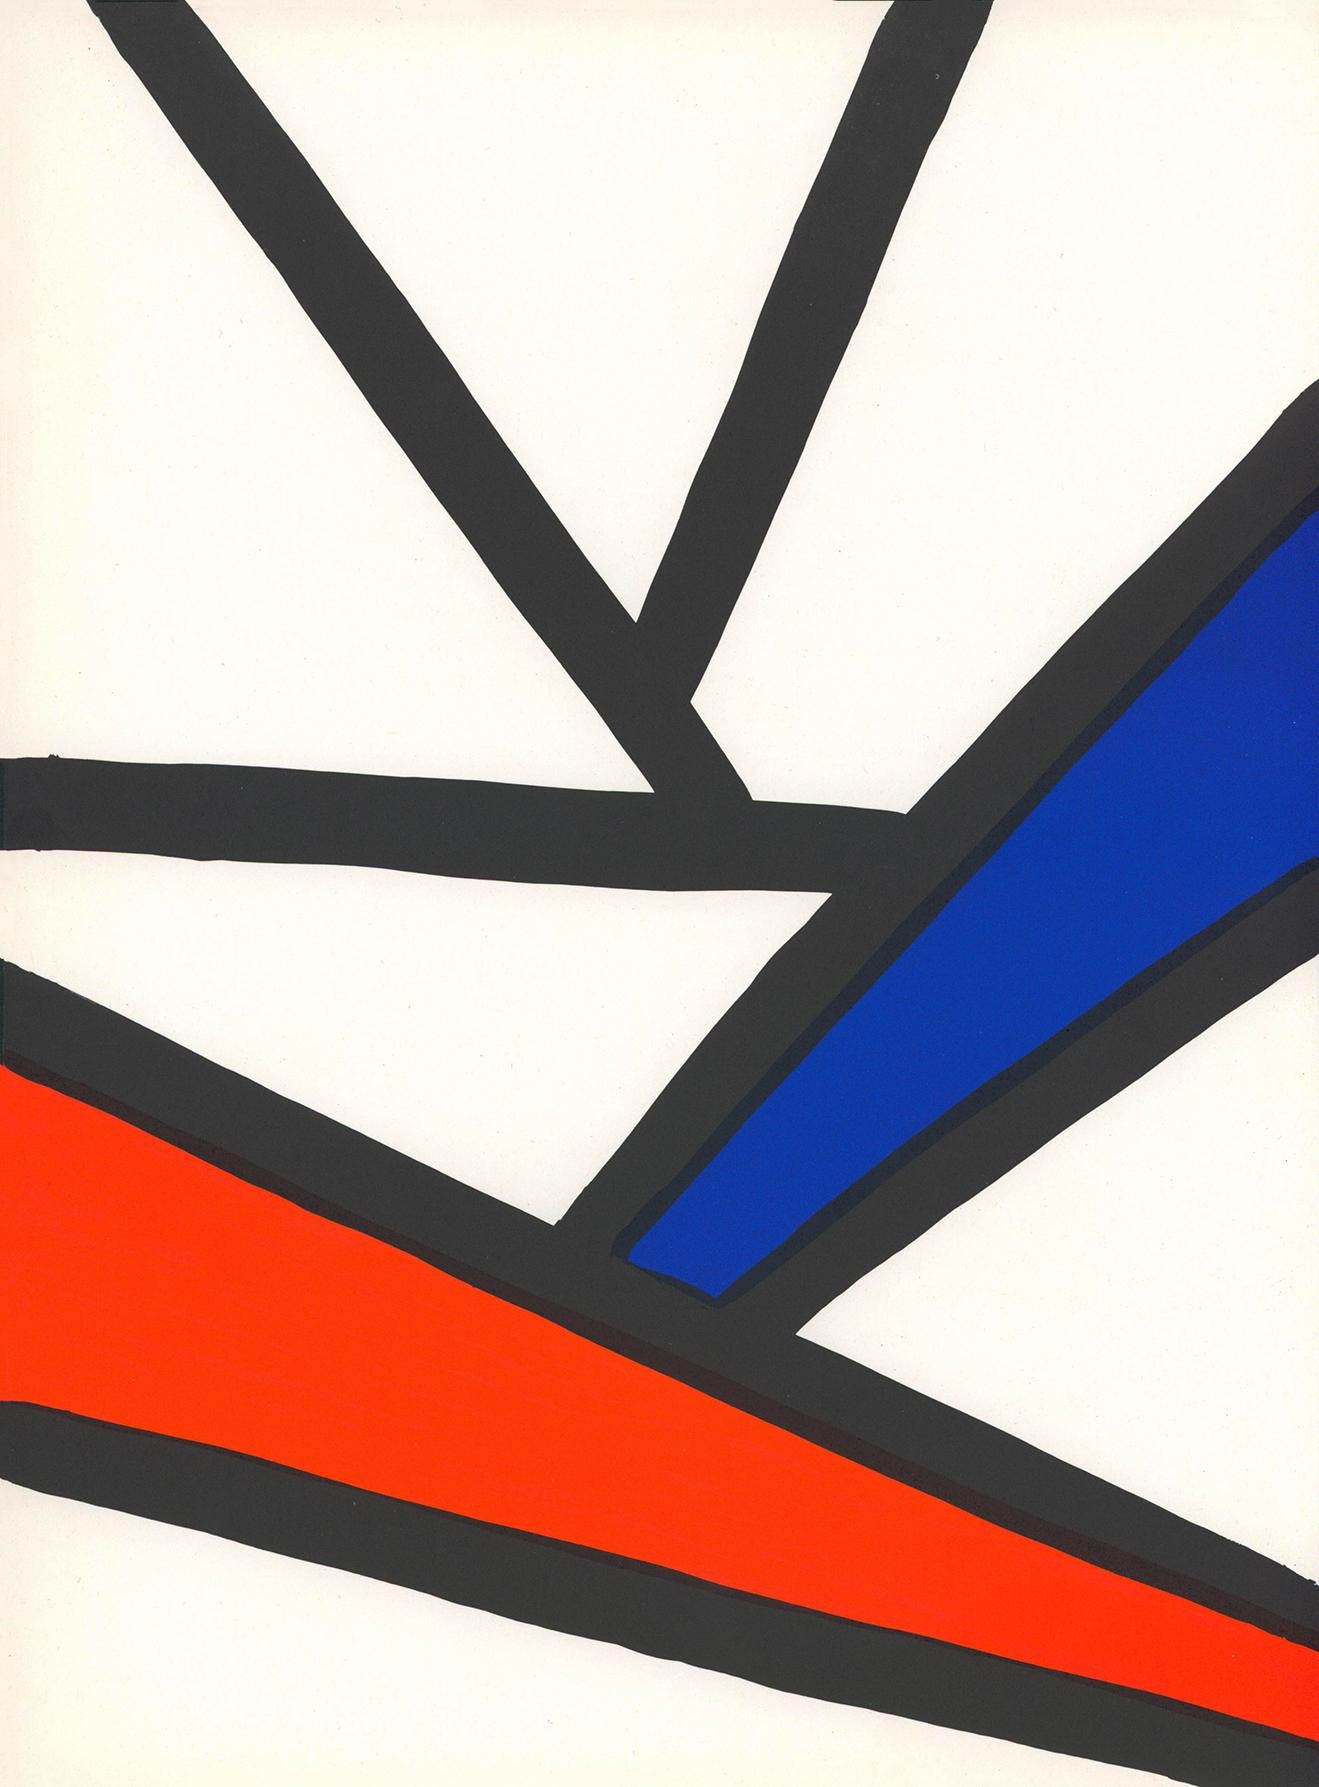 Original 1960s Alexander Calder lithograph:

Dimensions: 11 x 15 inches.

Portfolio: Derriere Le Miroir. Published by: Galerie Maeght, Paris, 1968.

Minor signs of handling in a couple of areas; in otherwise good overall vintage condition with well